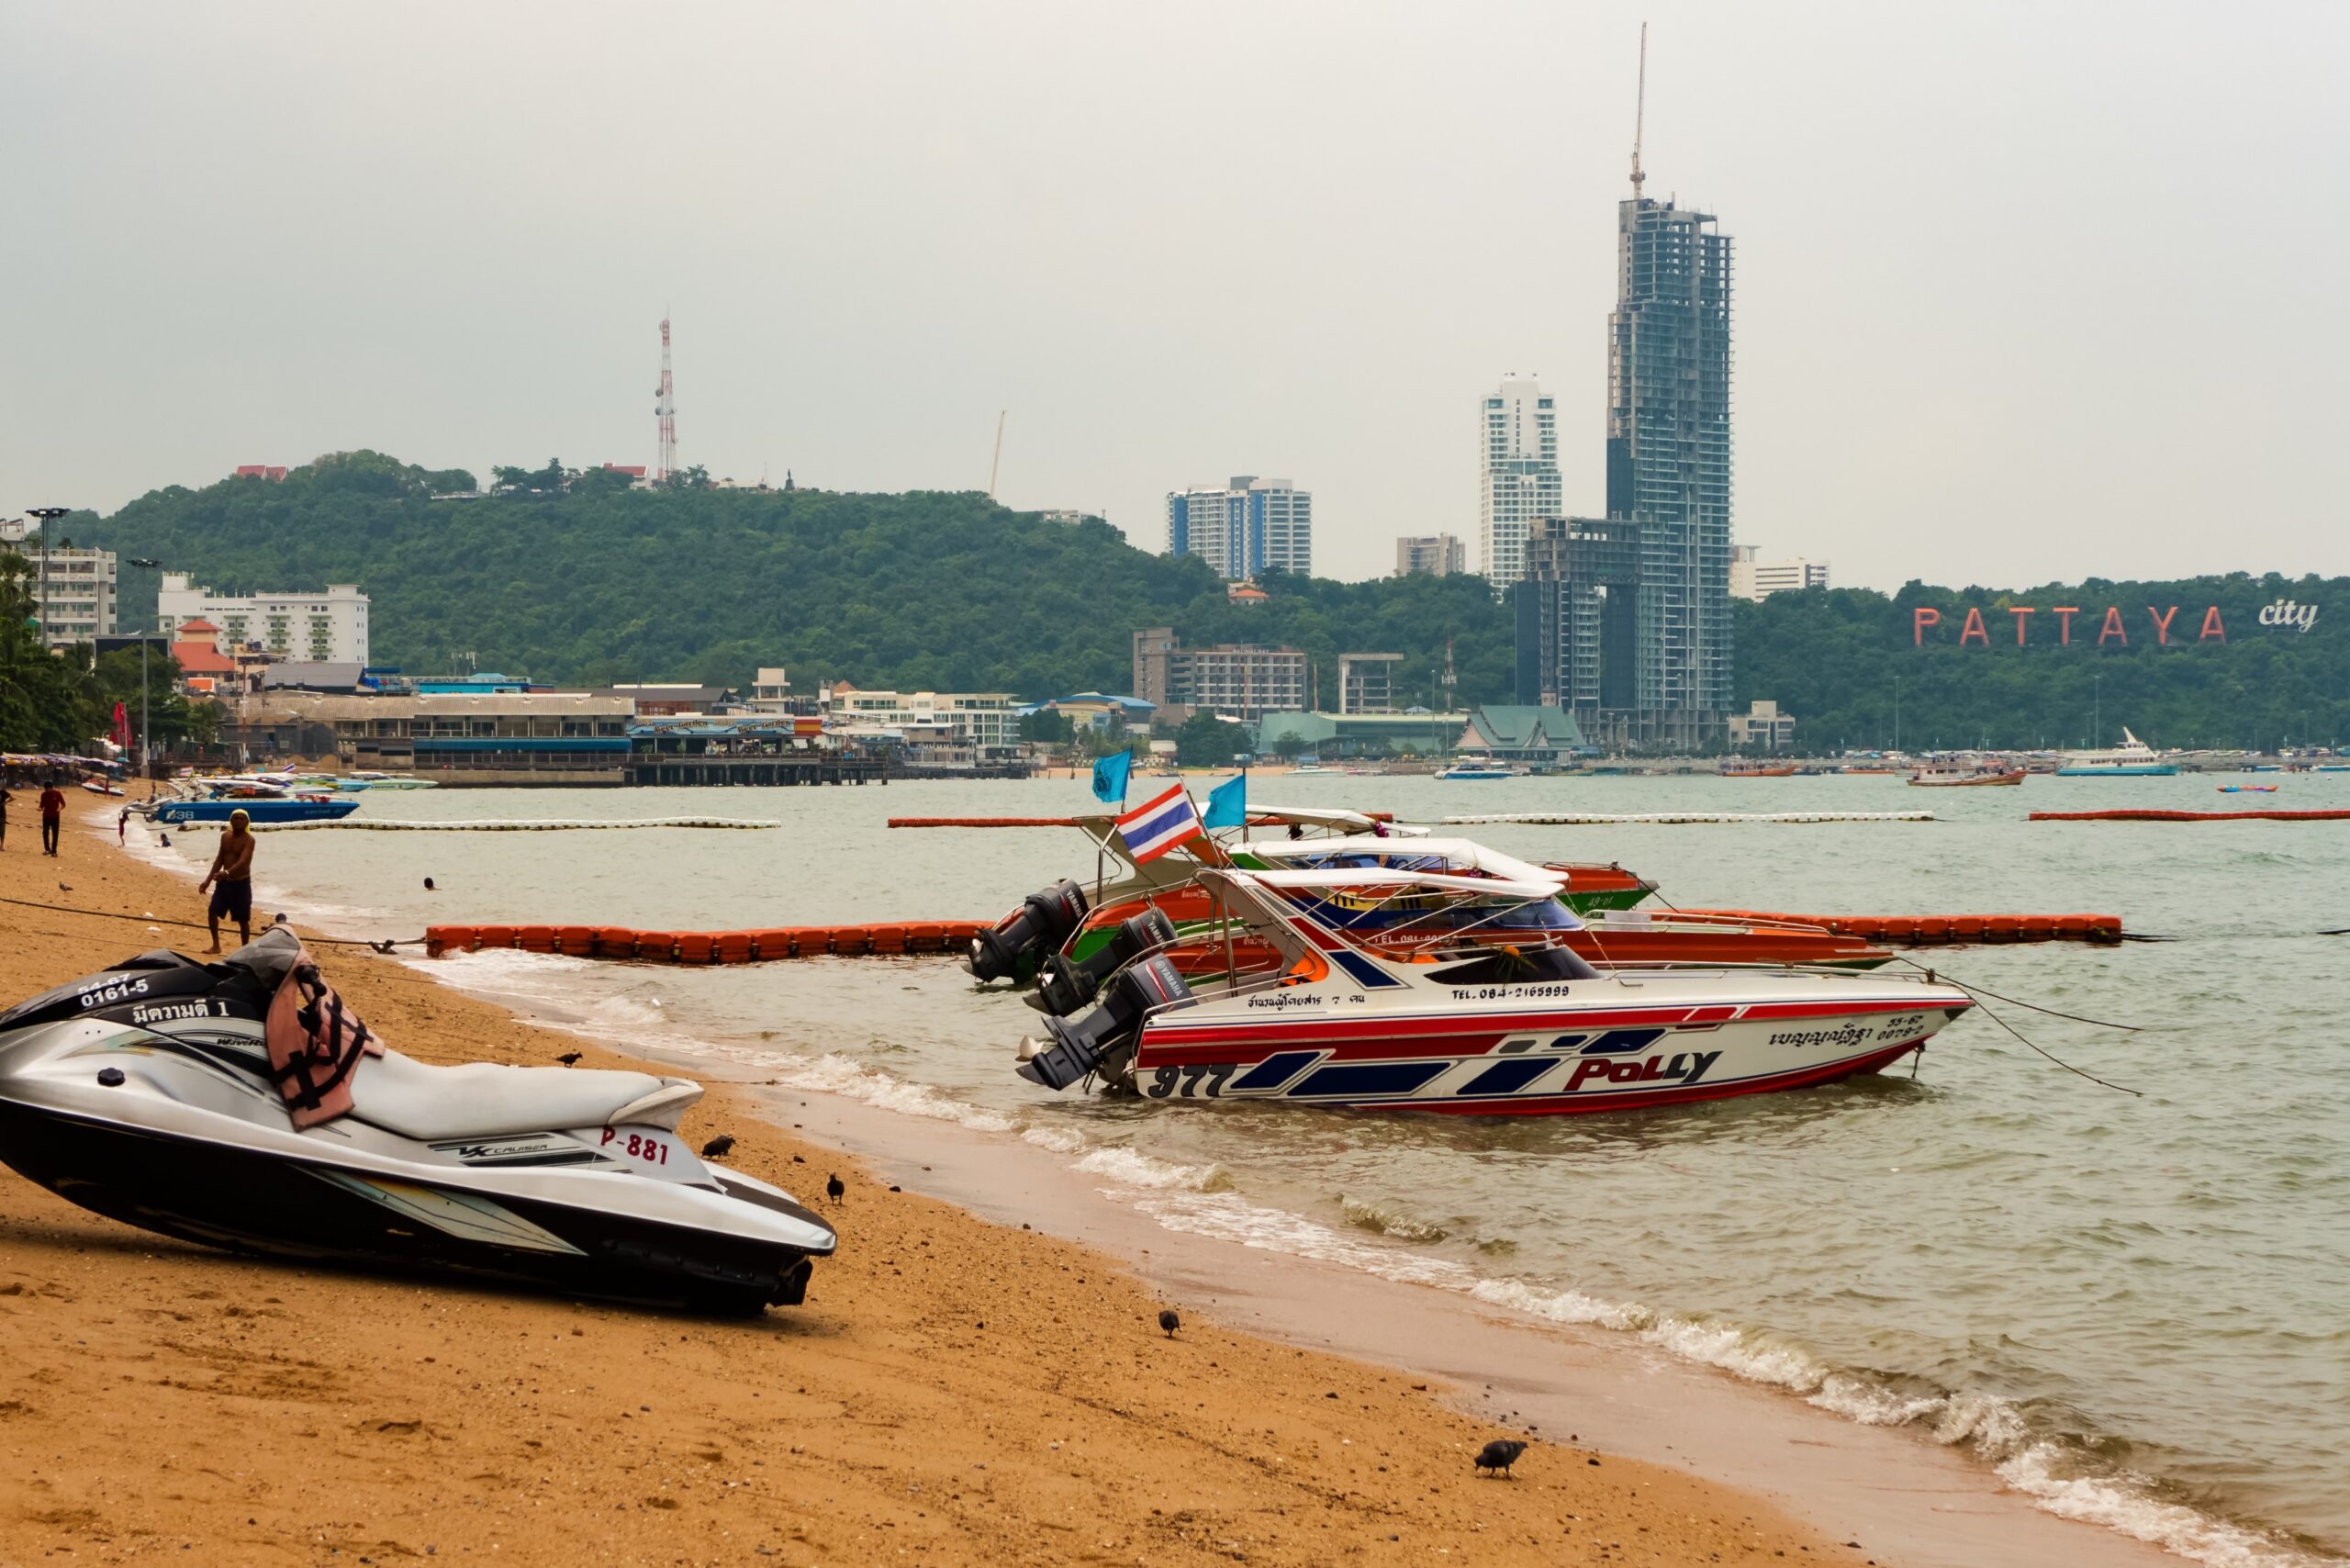 A Boat near the City sign and the Waterfront Suites & Residences in Pattaya Beach.